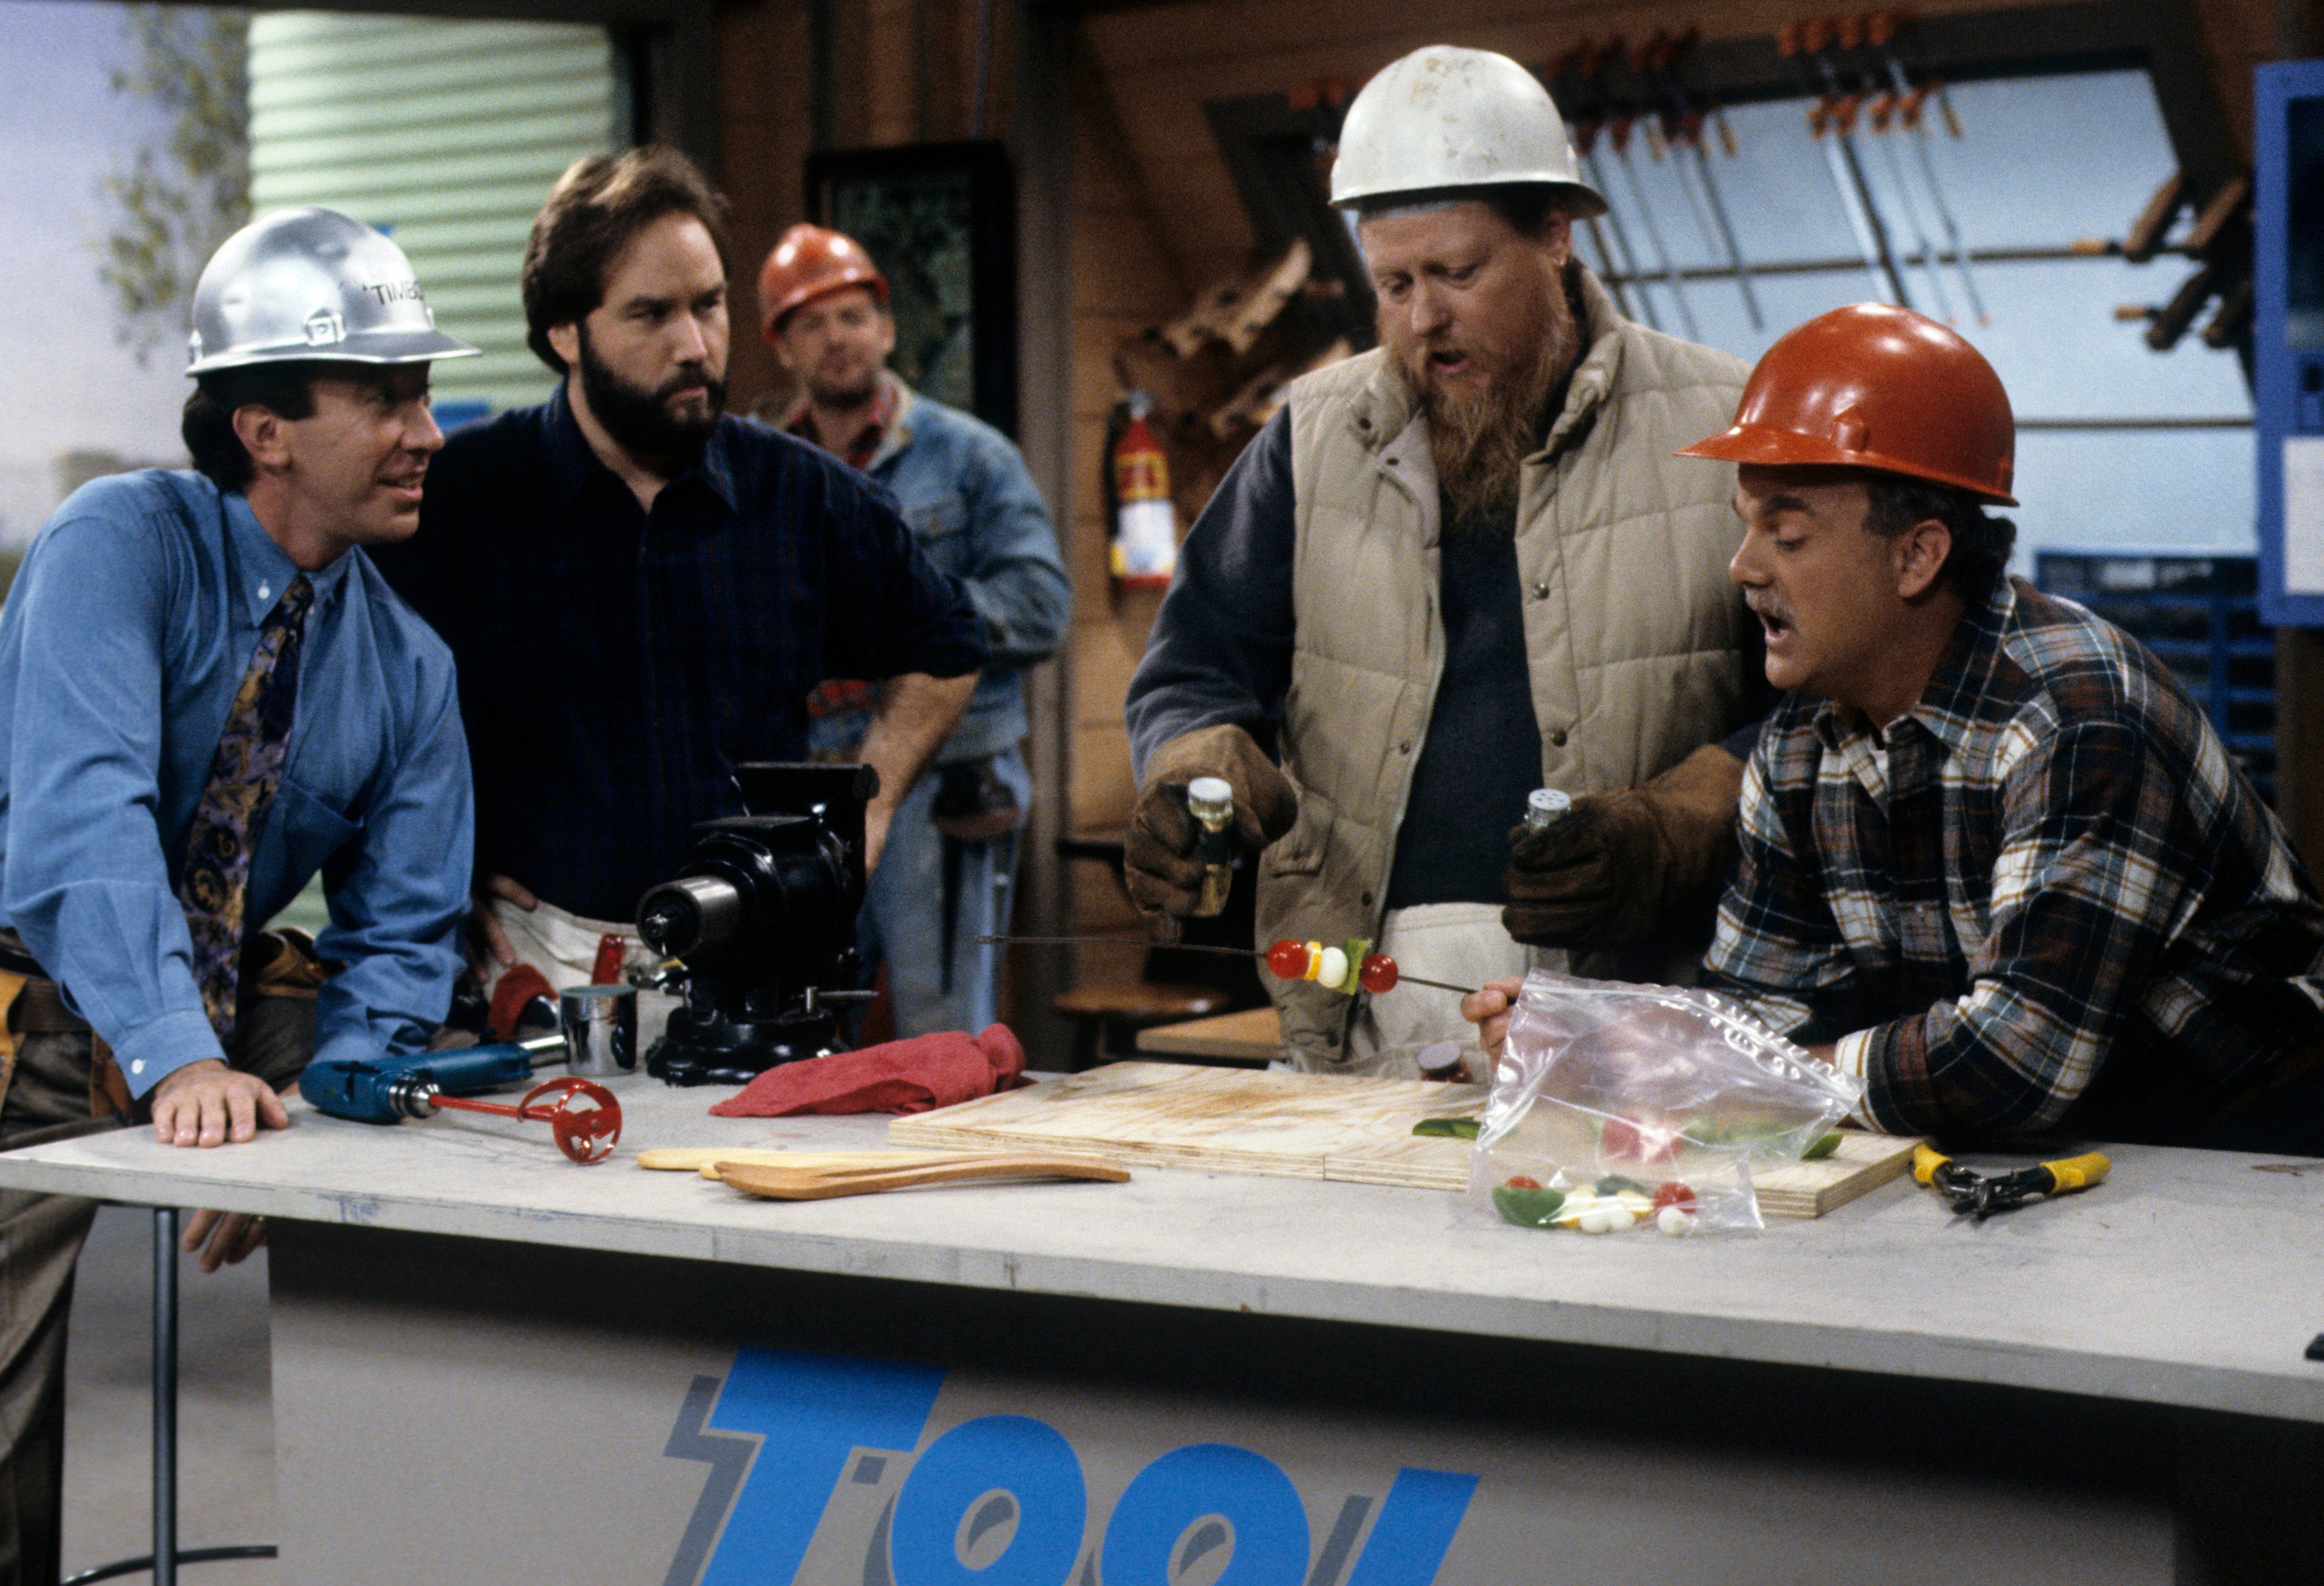 Tim Allen and Richard Karn appear in 'Tool Time' for 'Home Improvement'